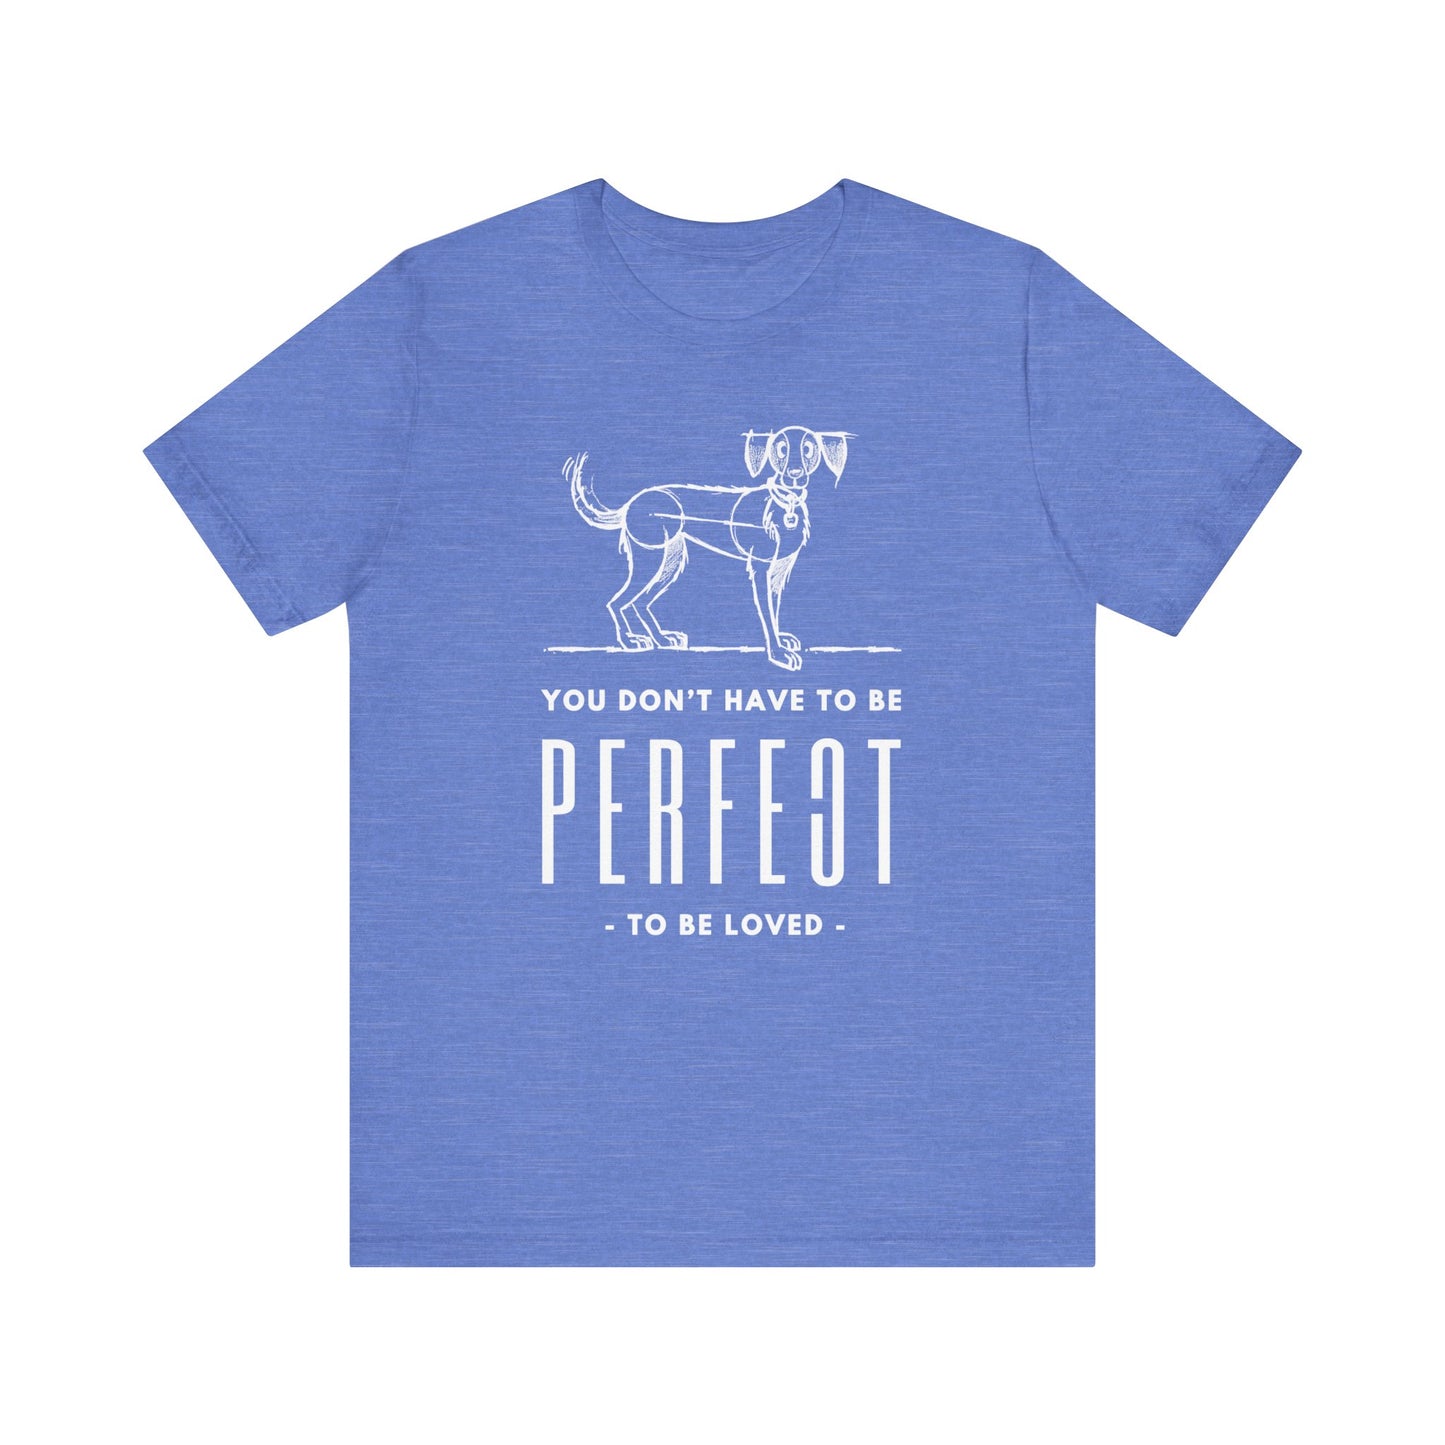  The Dogs Pure Love unisex t-shirt in heather blue showcases the empowering slogan 'You don't have to be perfect to be loved' with elegance, against a backdrop of pristine white.